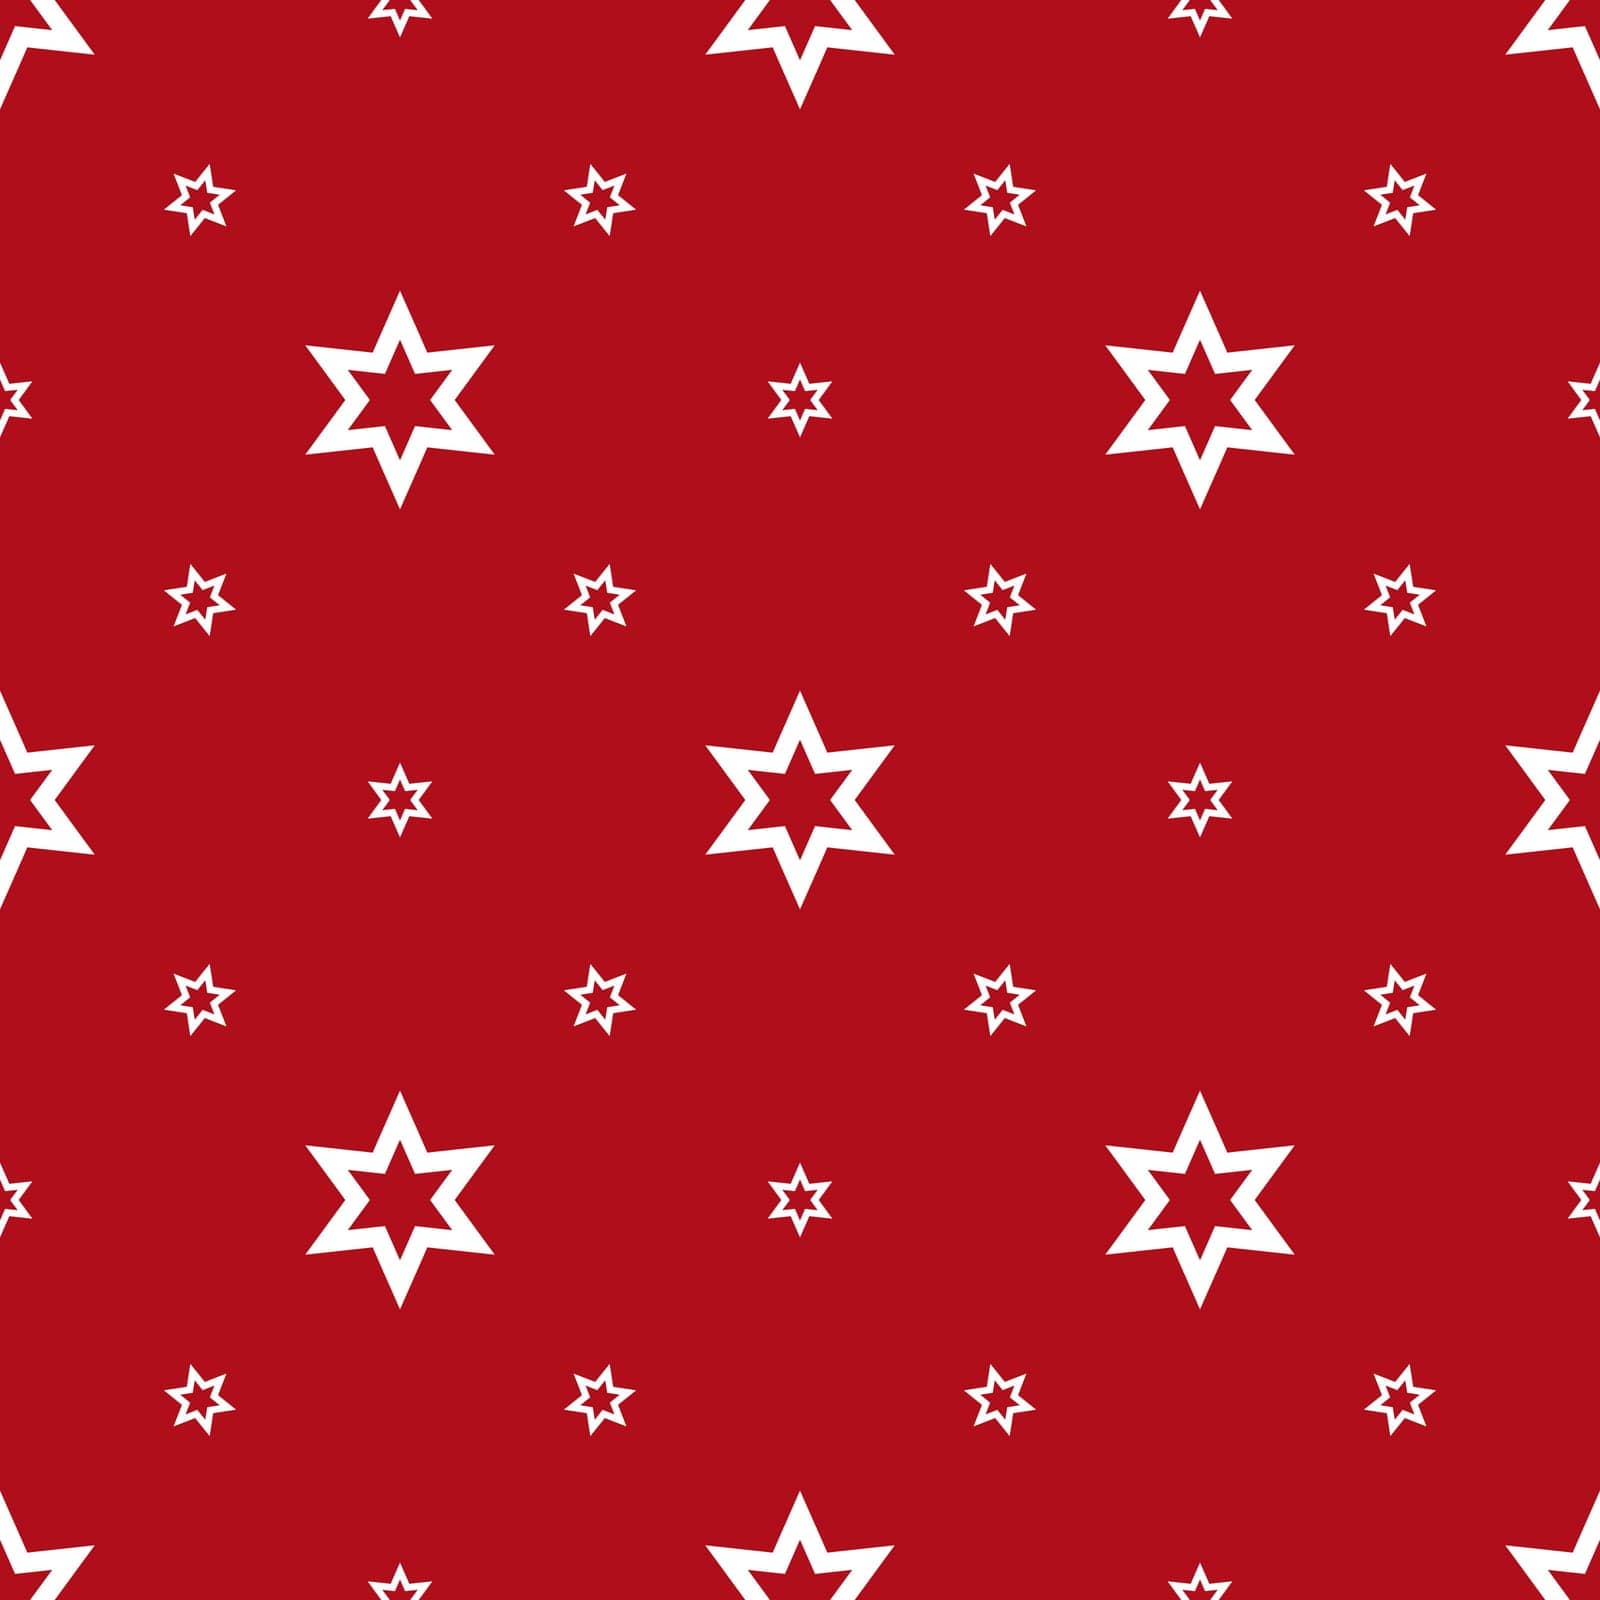 seamless background with stars depicted on bright red surface. vector illustration